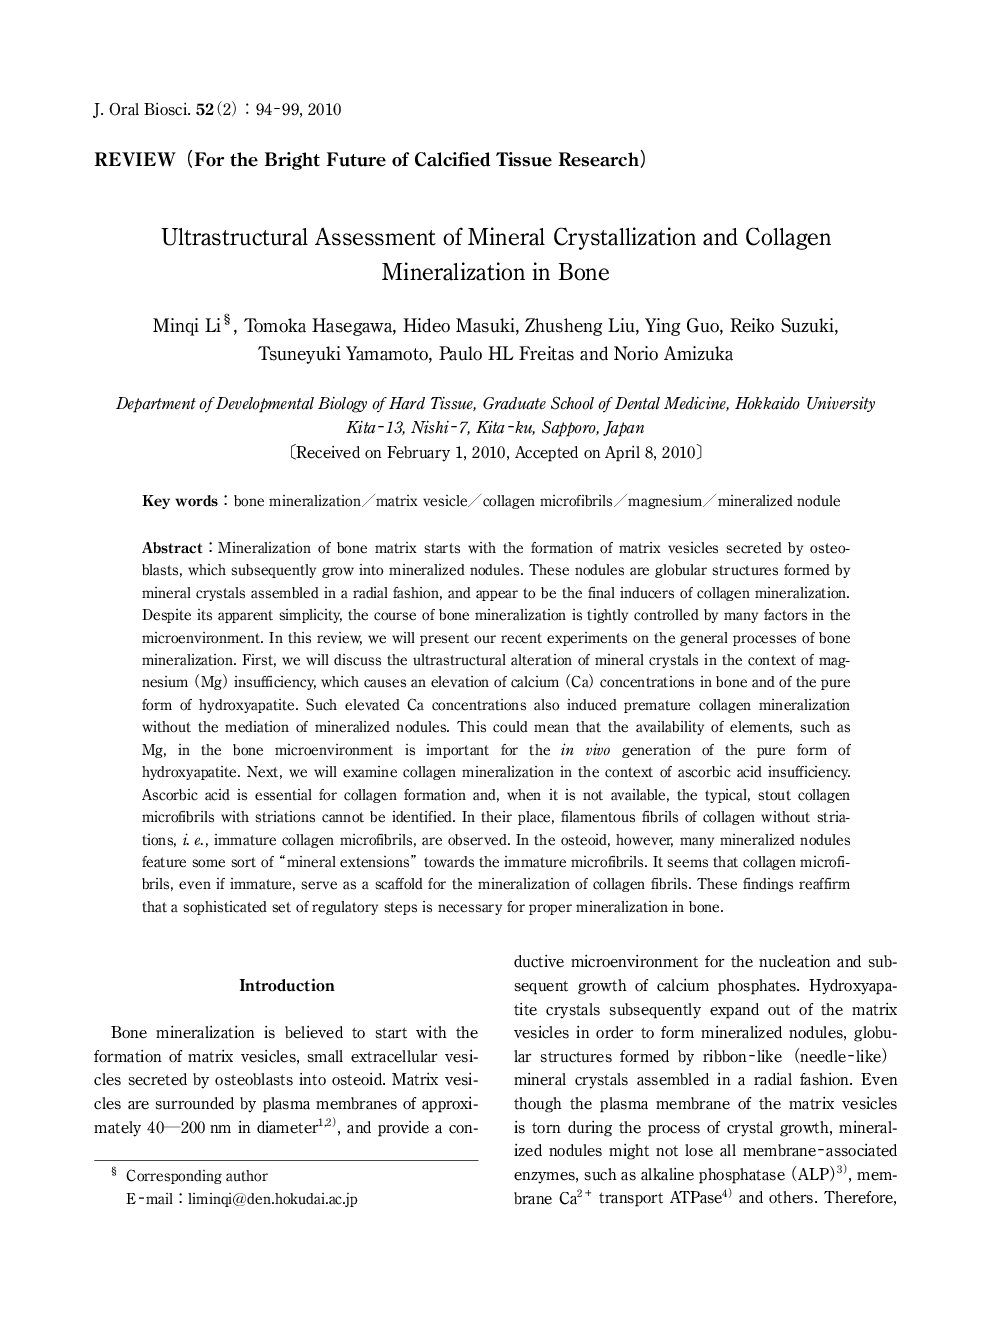 Ultrastructural Assessment of Mineral Crystallization and Collagen Mineralization in Bone